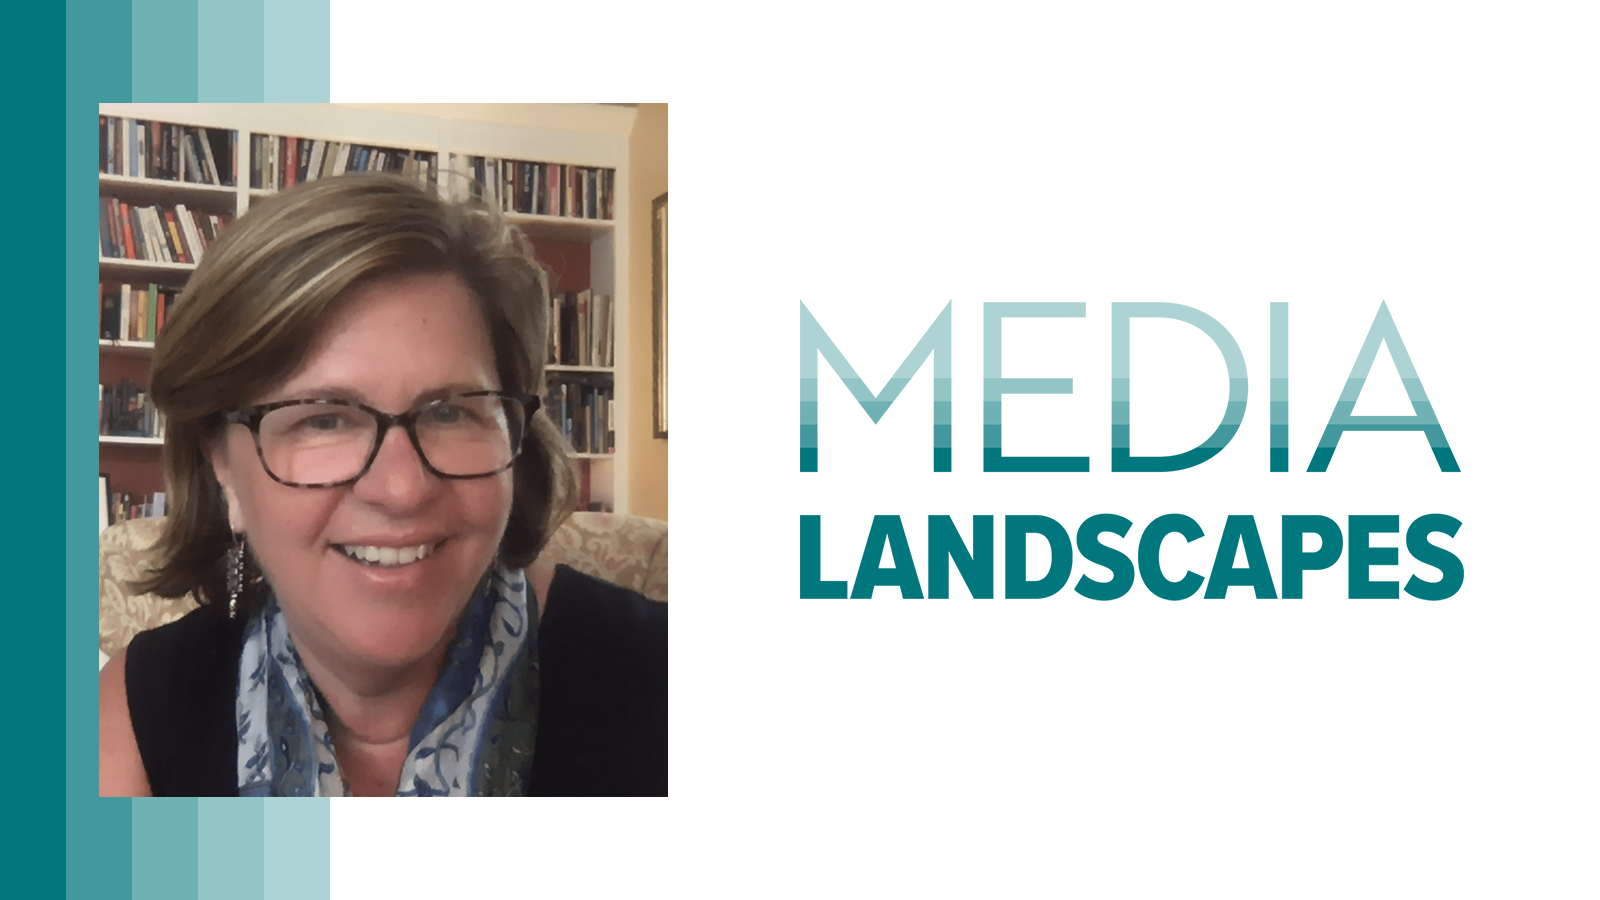 A photo of Renee Hobbs and the Media Landscapes logo